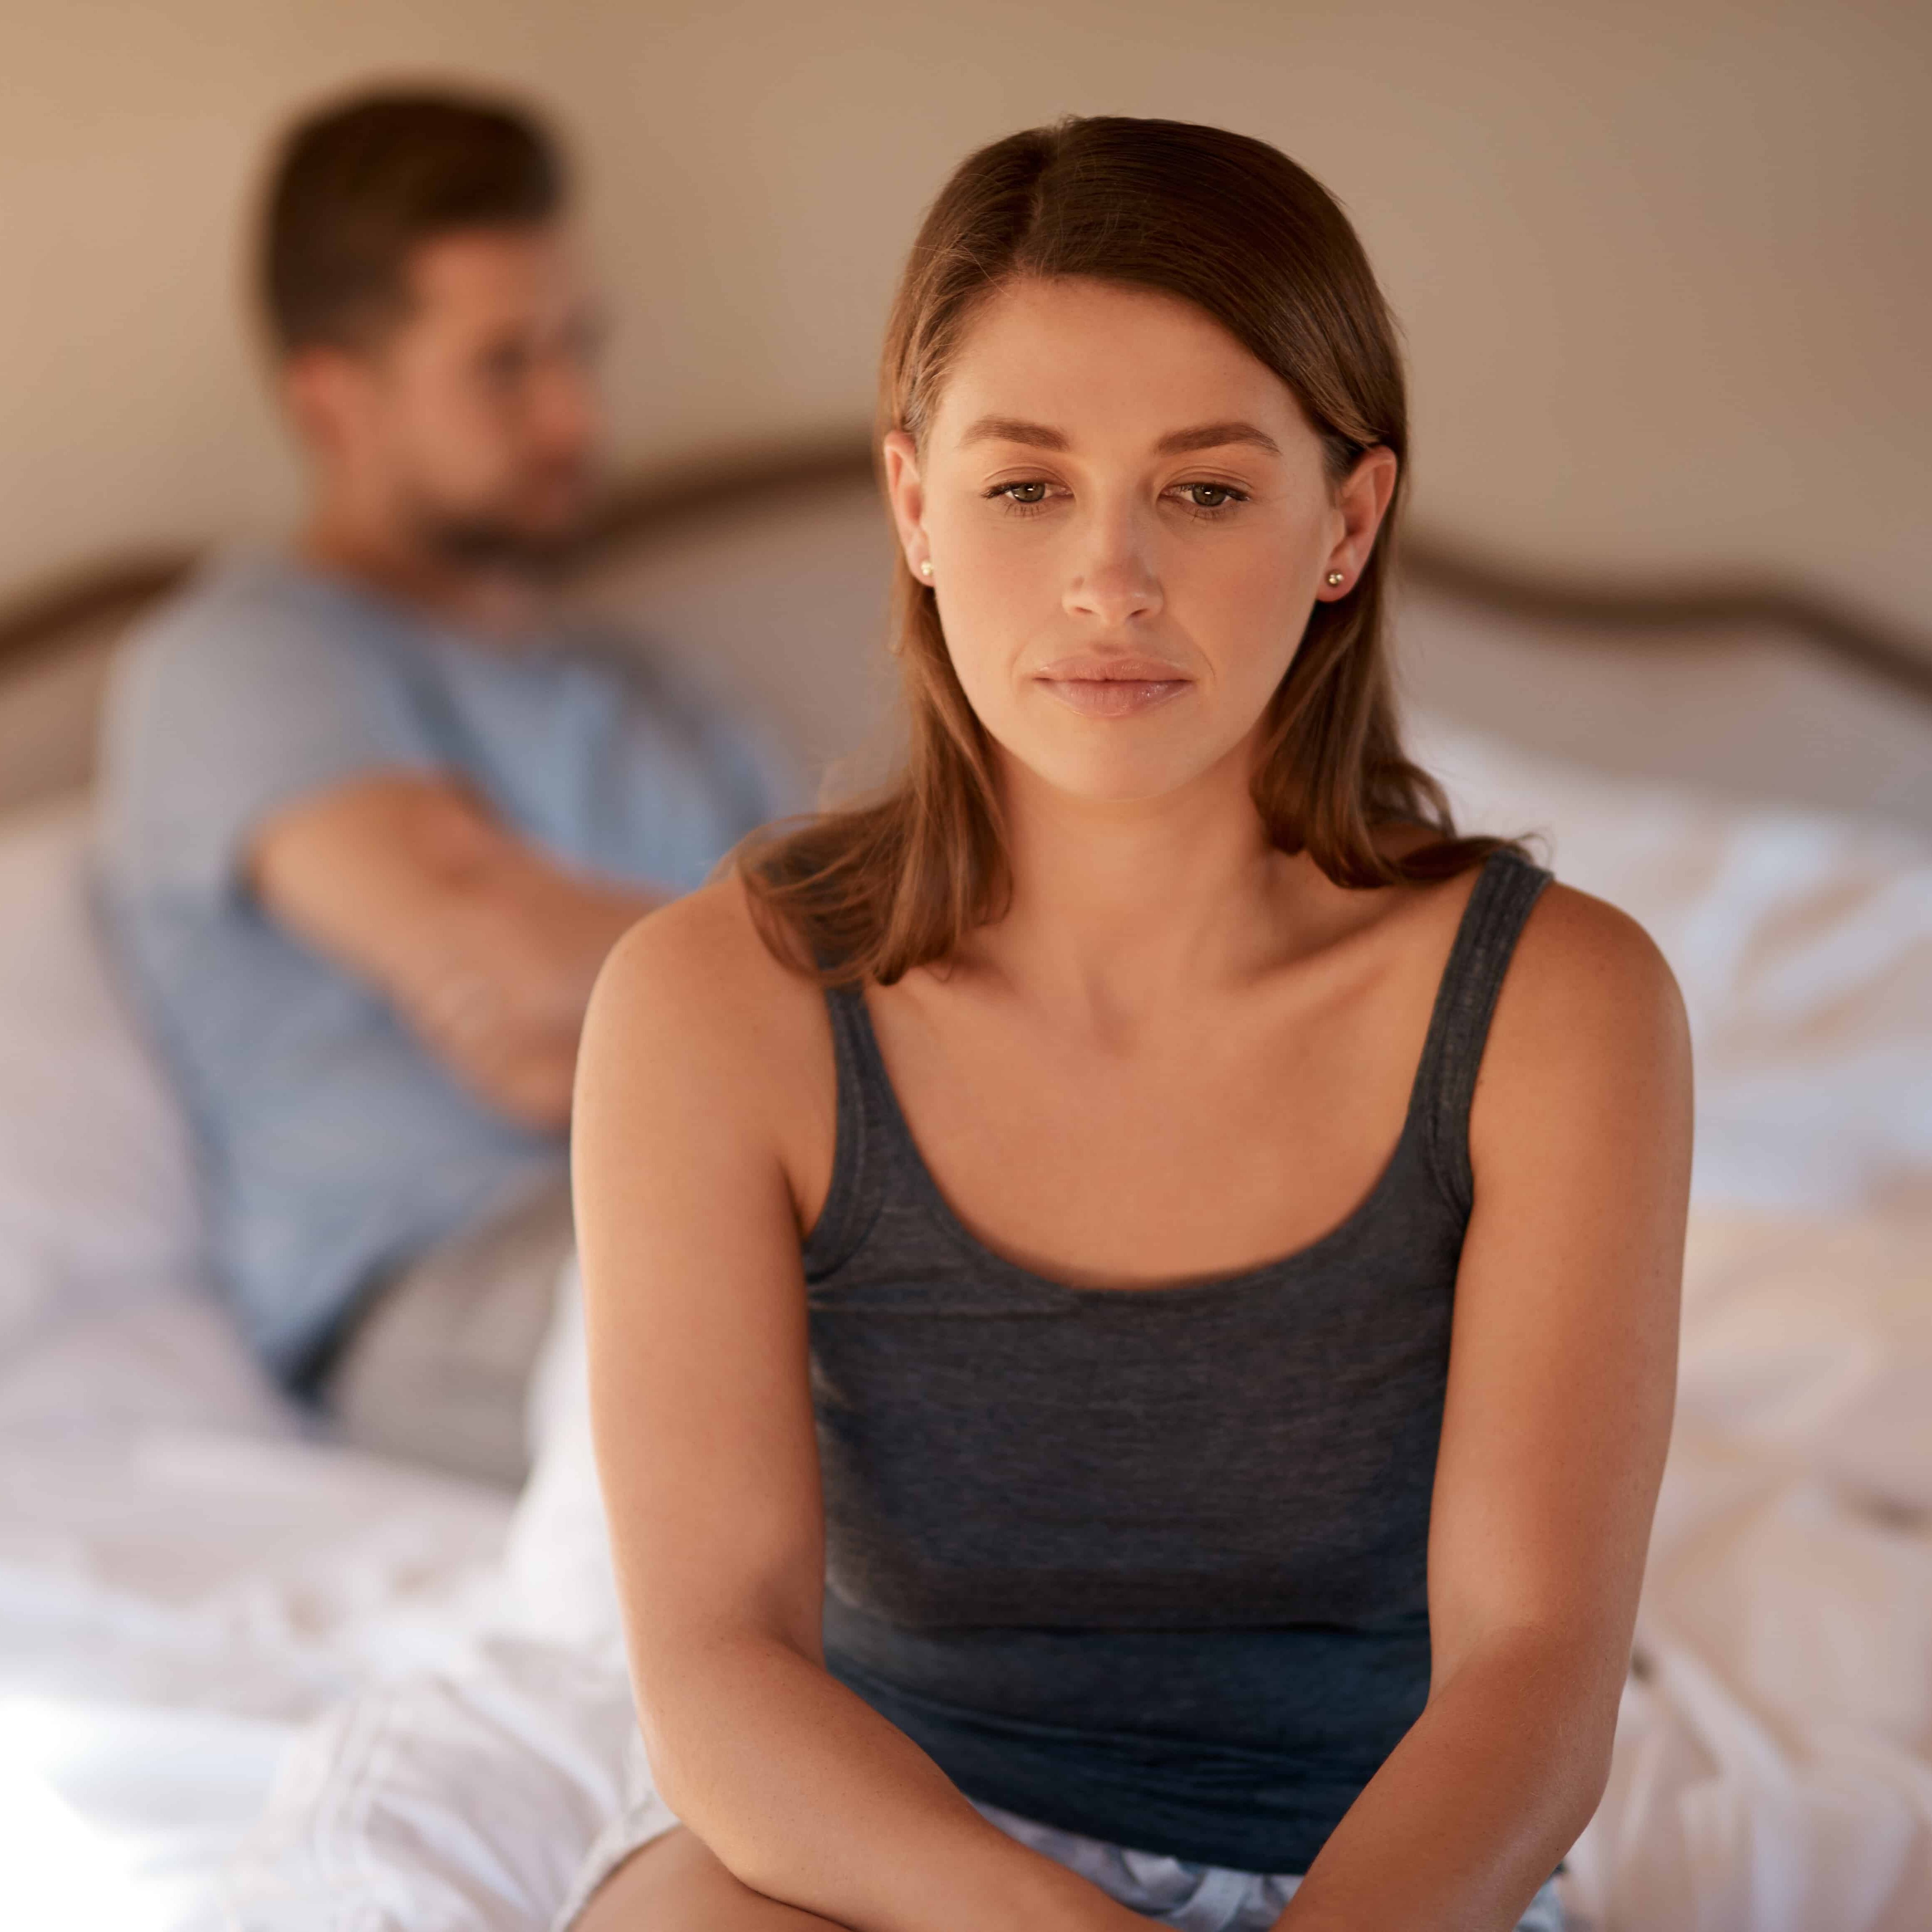 signs of emotional cheating upset husband and wife